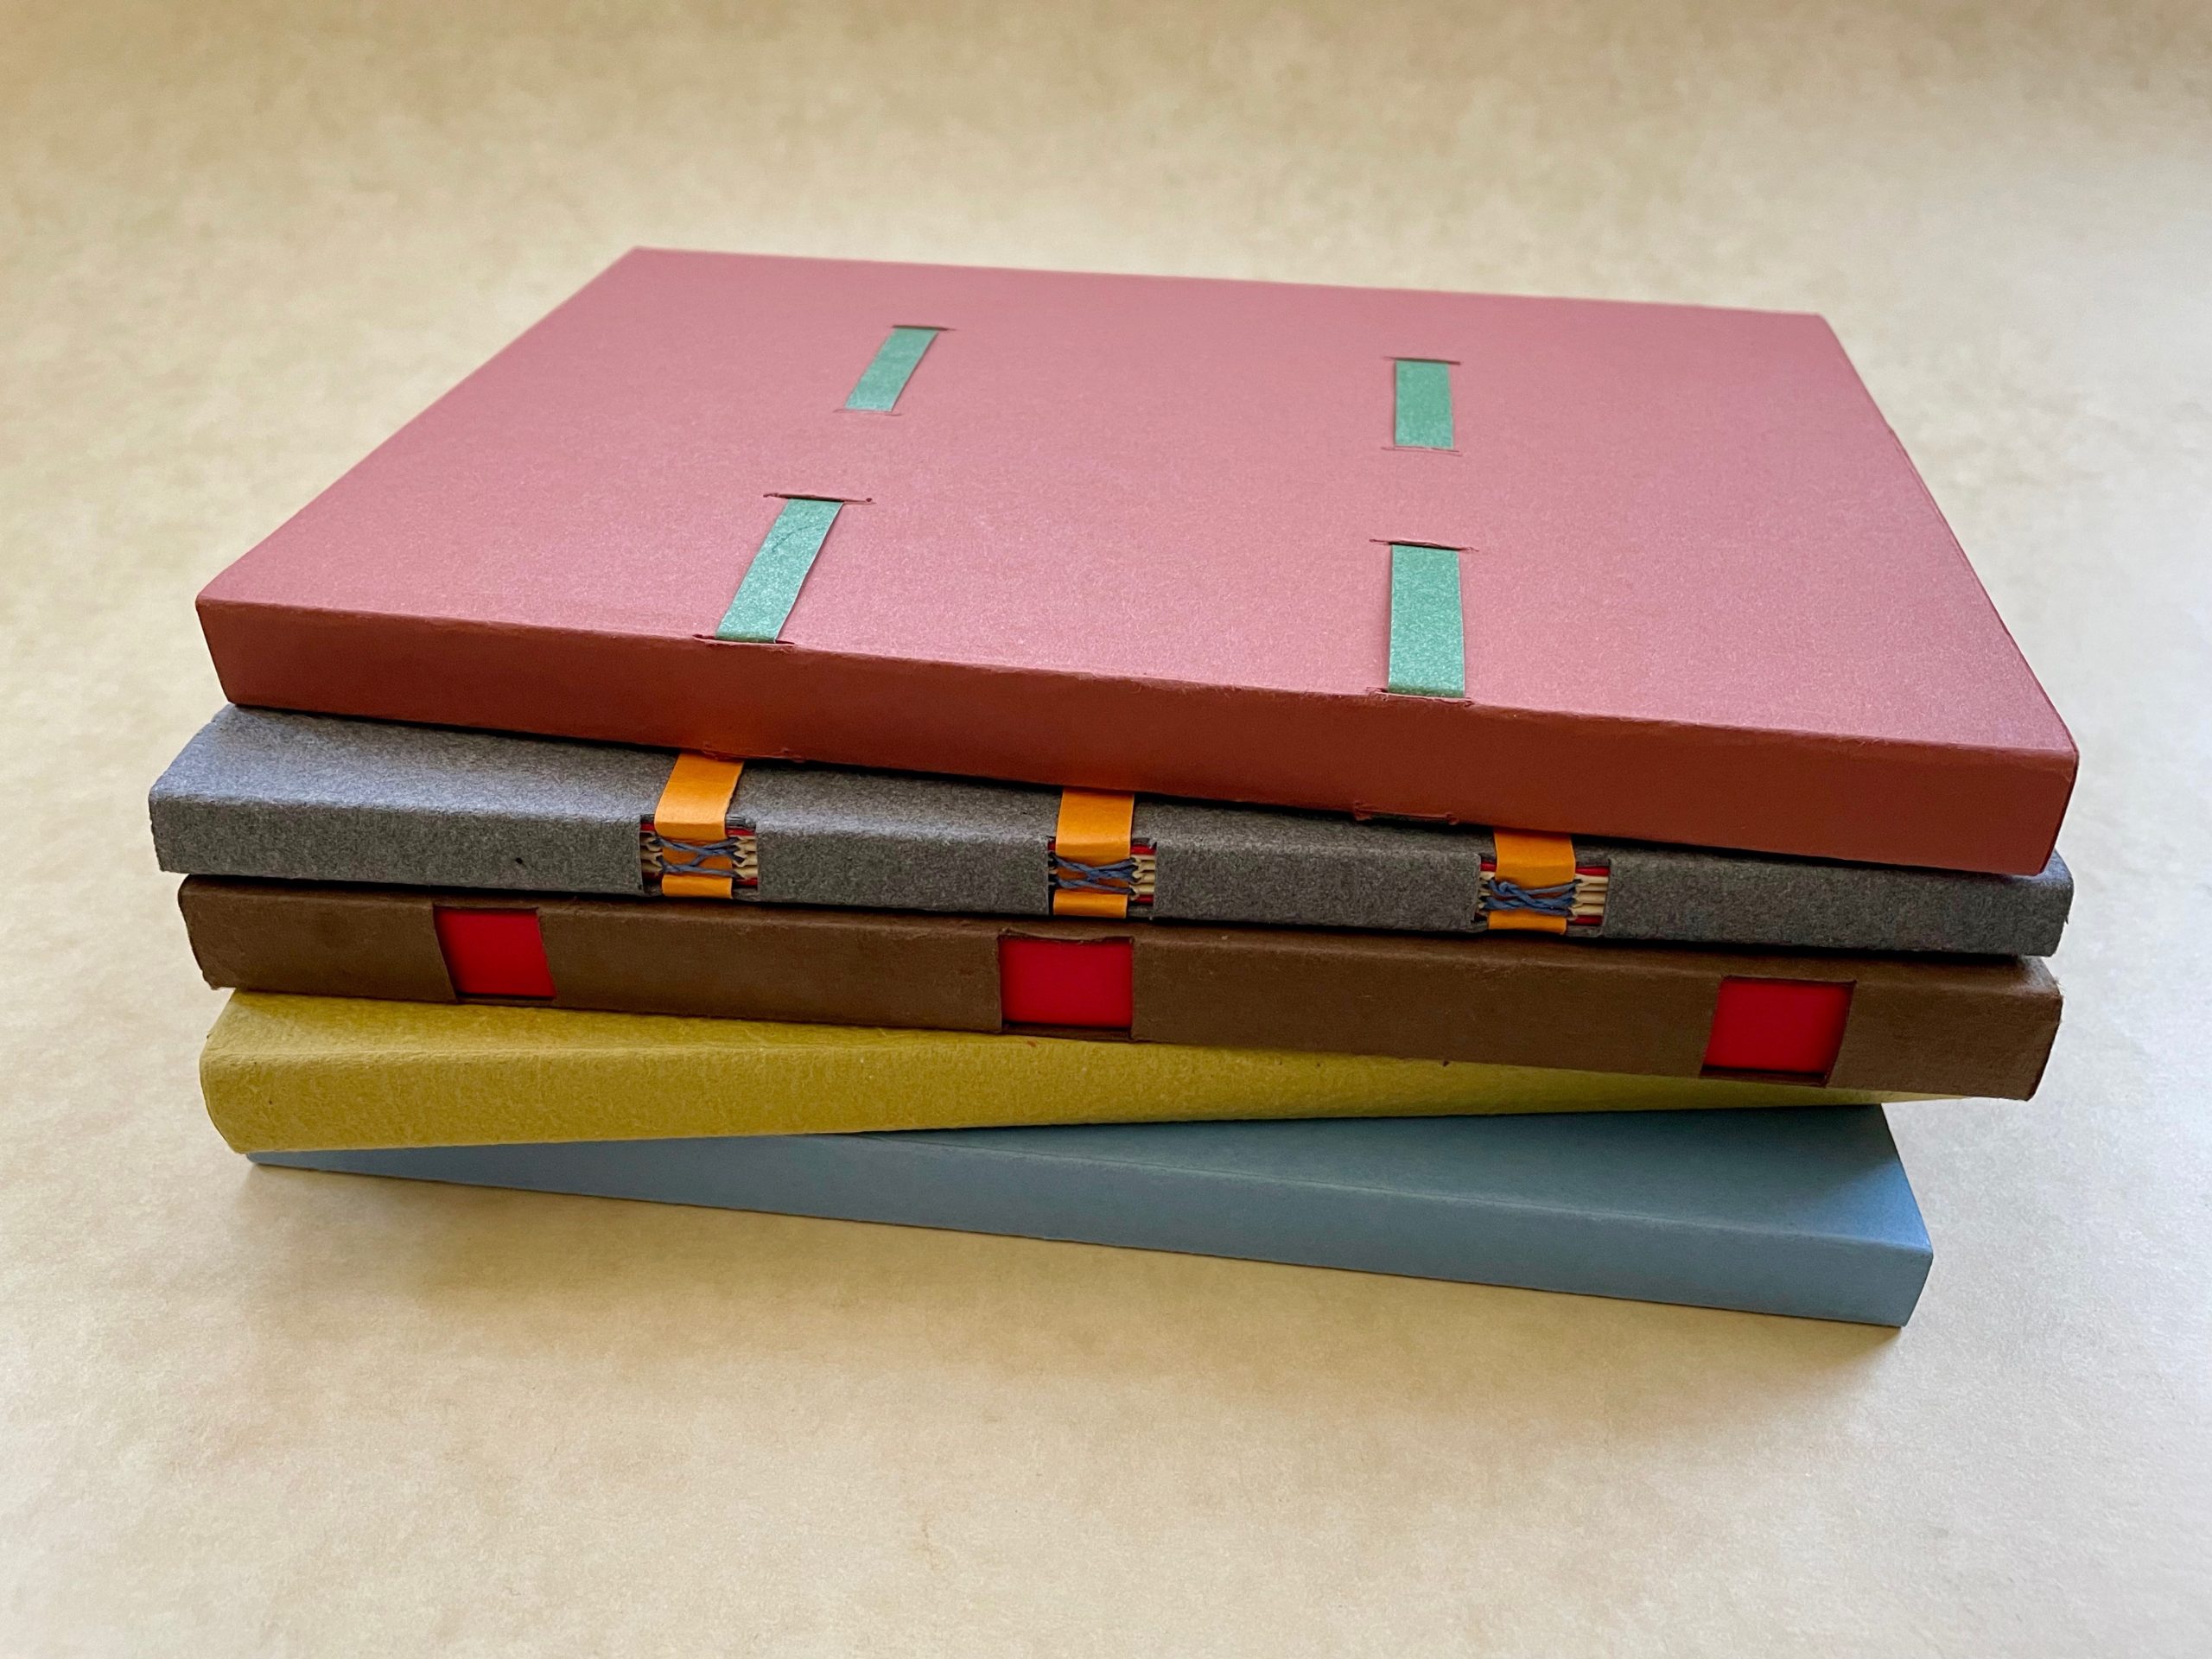 stack of hand-made books with paper case binding